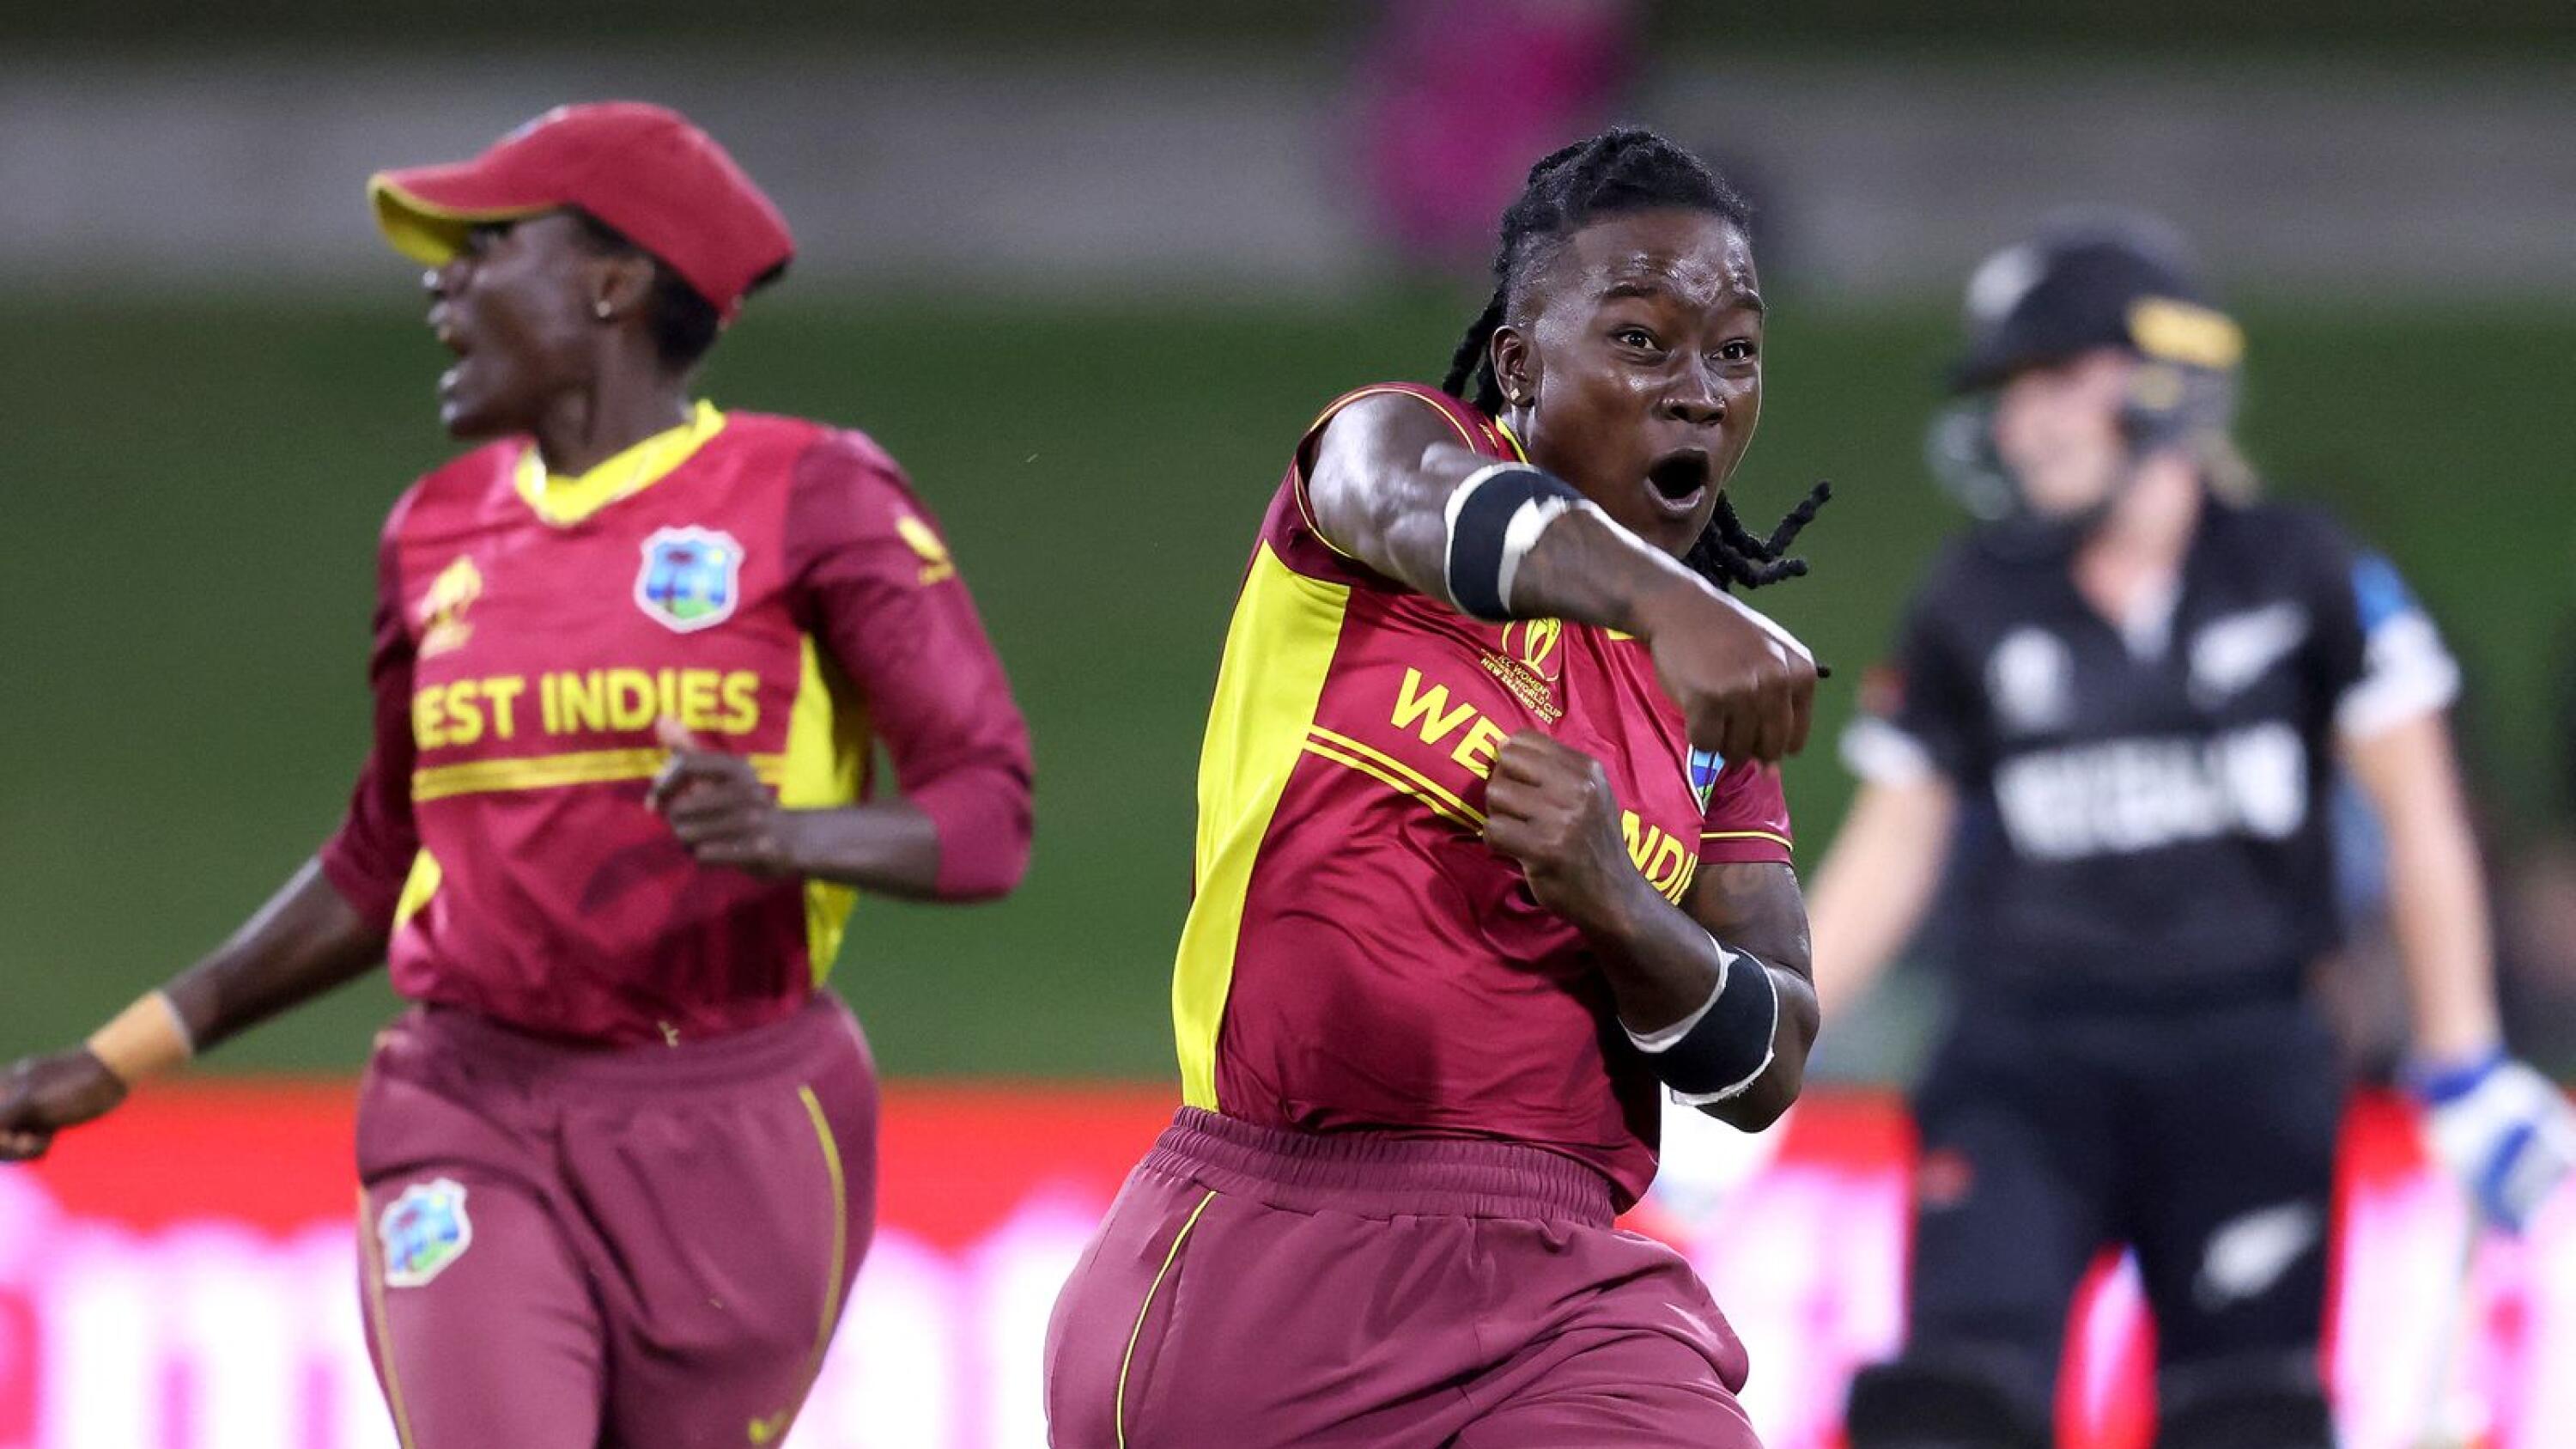 West Indies Deandra Dottin celebrates the dismissal of New Zealand's Fran Jonas to win the match during Round 1 of the Women's Cricket World Cup at Bay Oval in Mount Maunganui on Friday